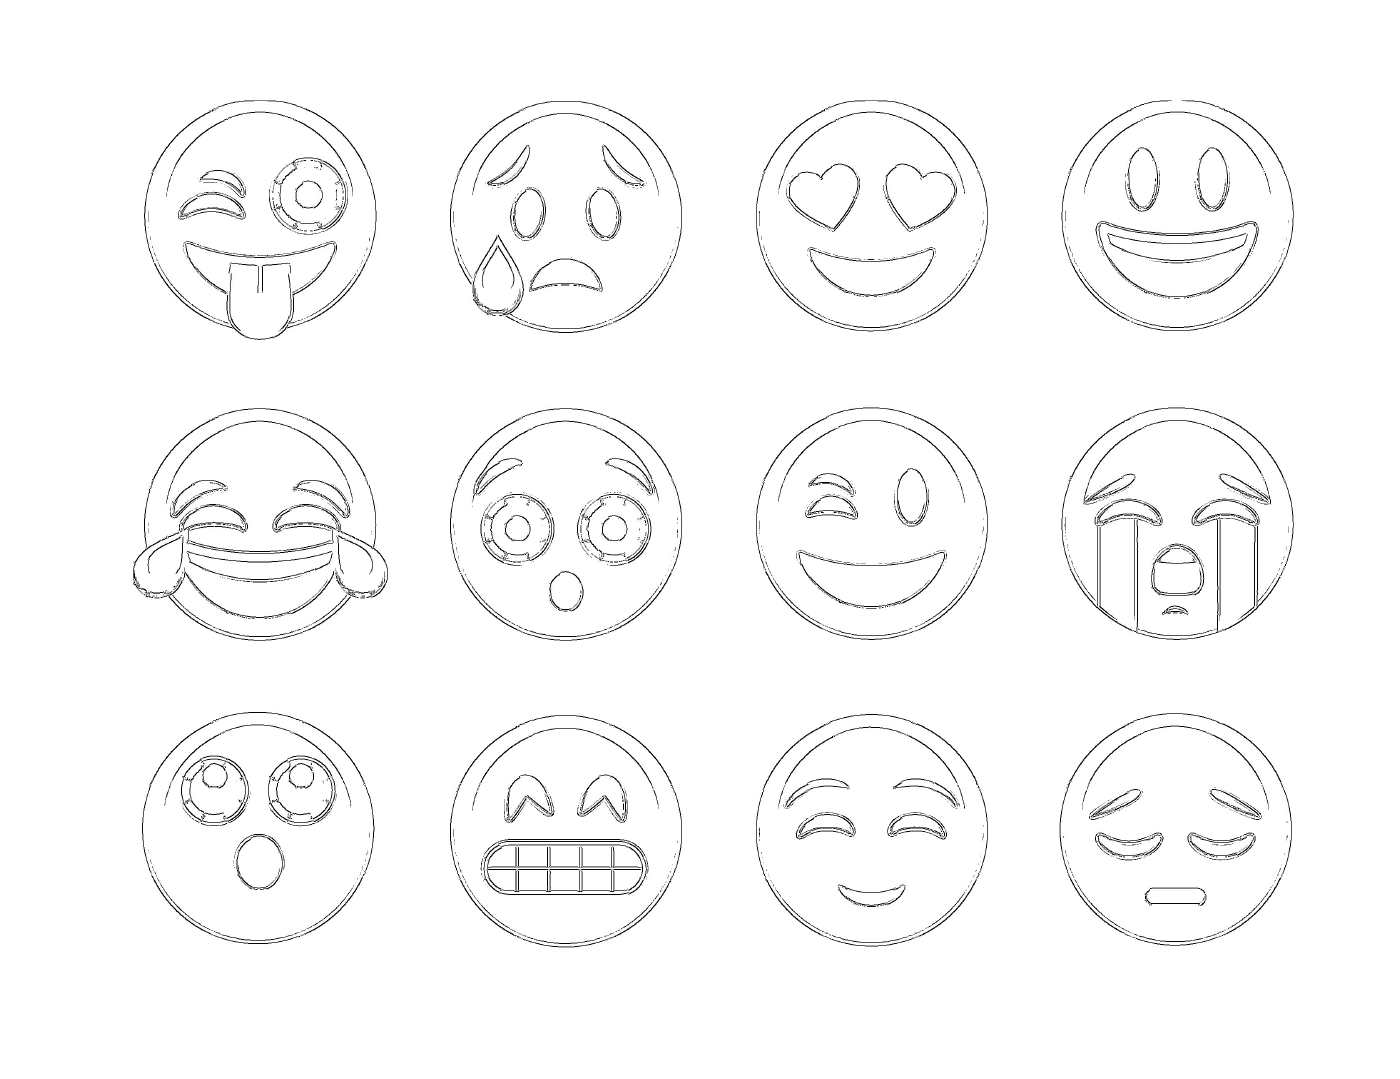  A set of 12 different emoticons 